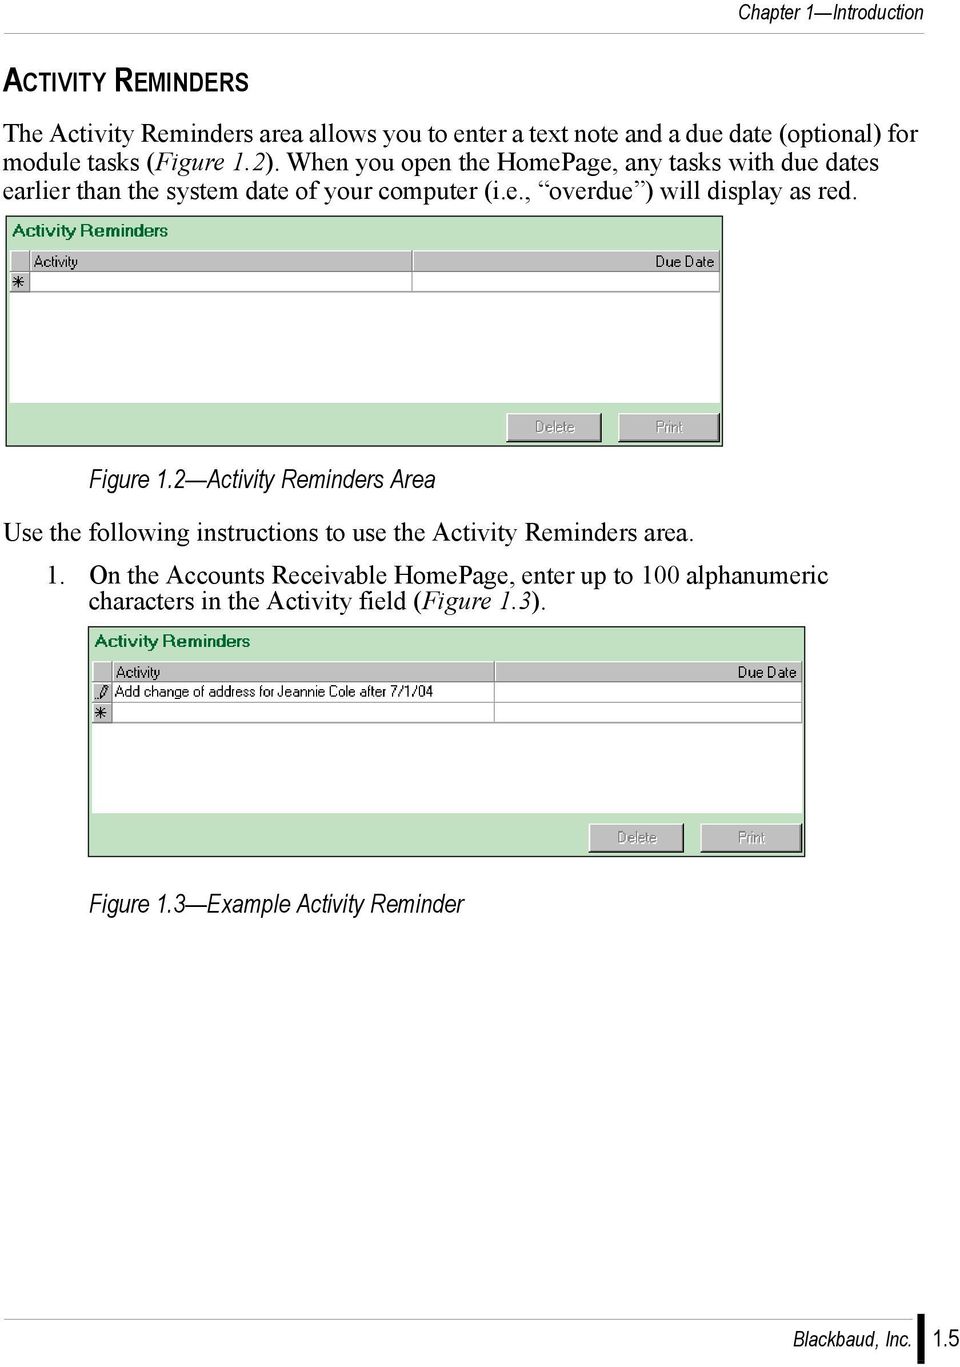 Figure 1.2 Activity Reminders Area Use the following instructions to use the Activity Reminders area. 1. On the Accounts Receivable HomePage, enter up to 100 alphanumeric characters in the Activity field (Figure 1.